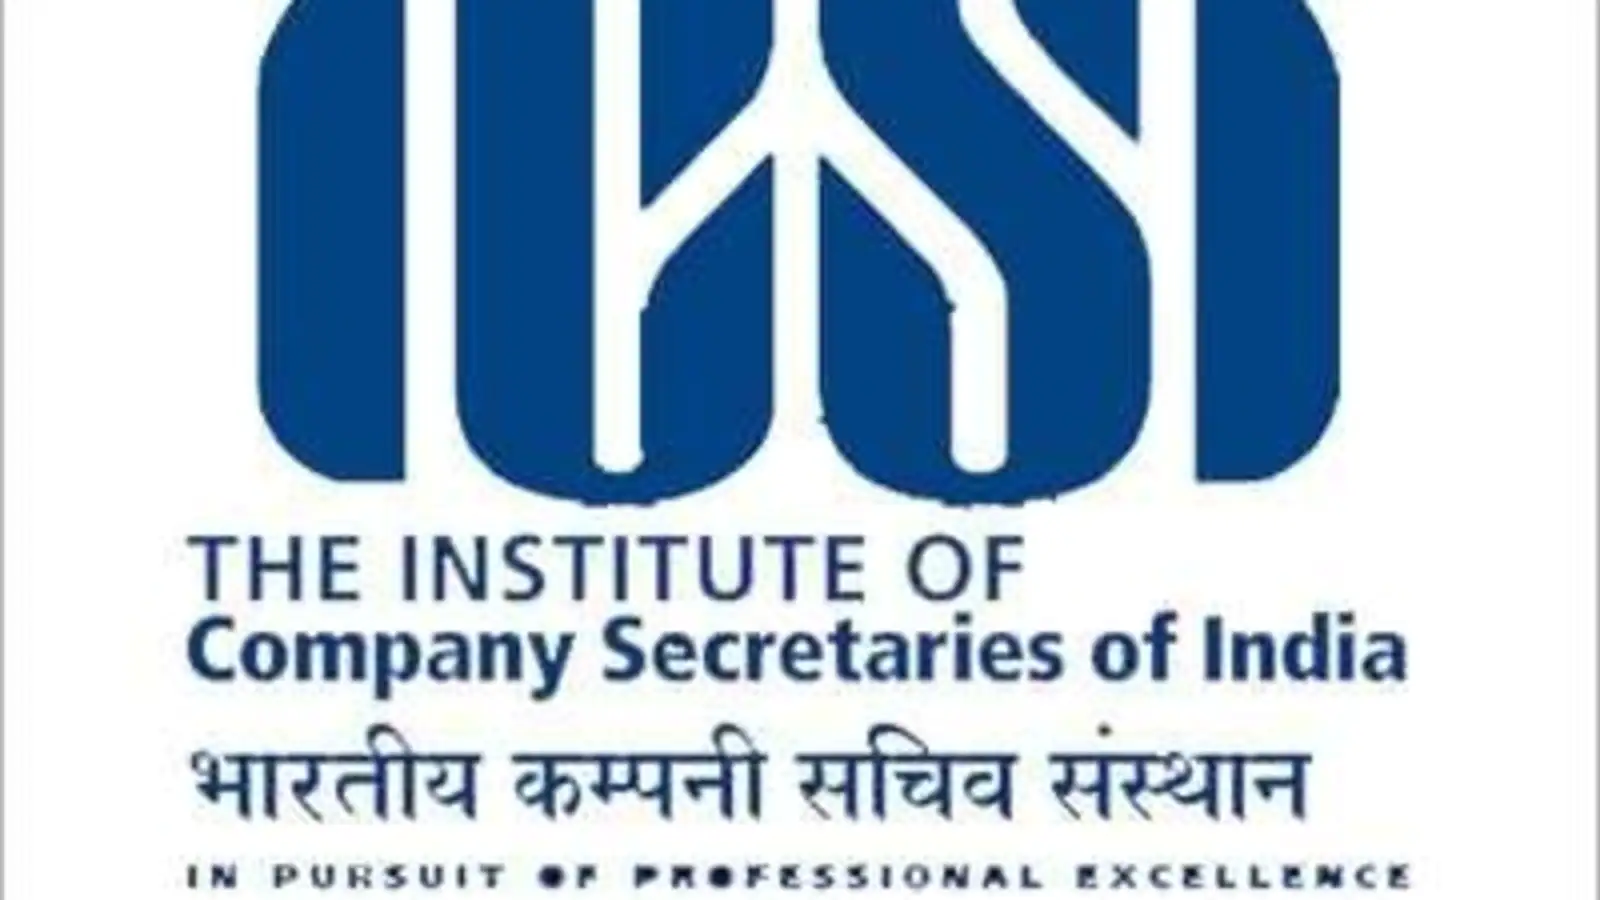 ICSI CS December 2022 Exam: Registration begins today, check schedule | Competitive Exams